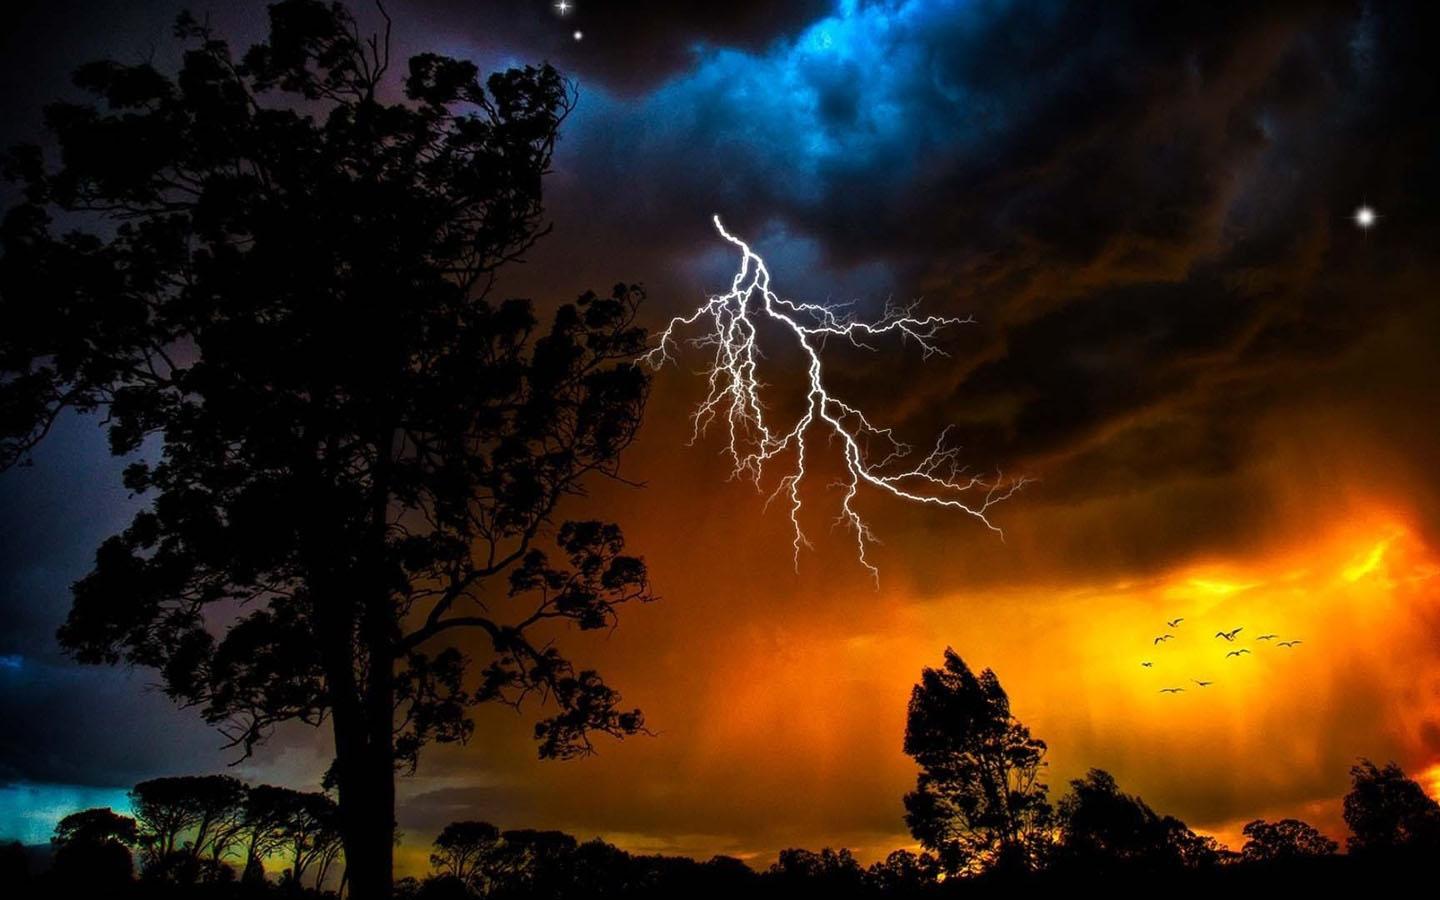 Thunderstorm Backgrounds